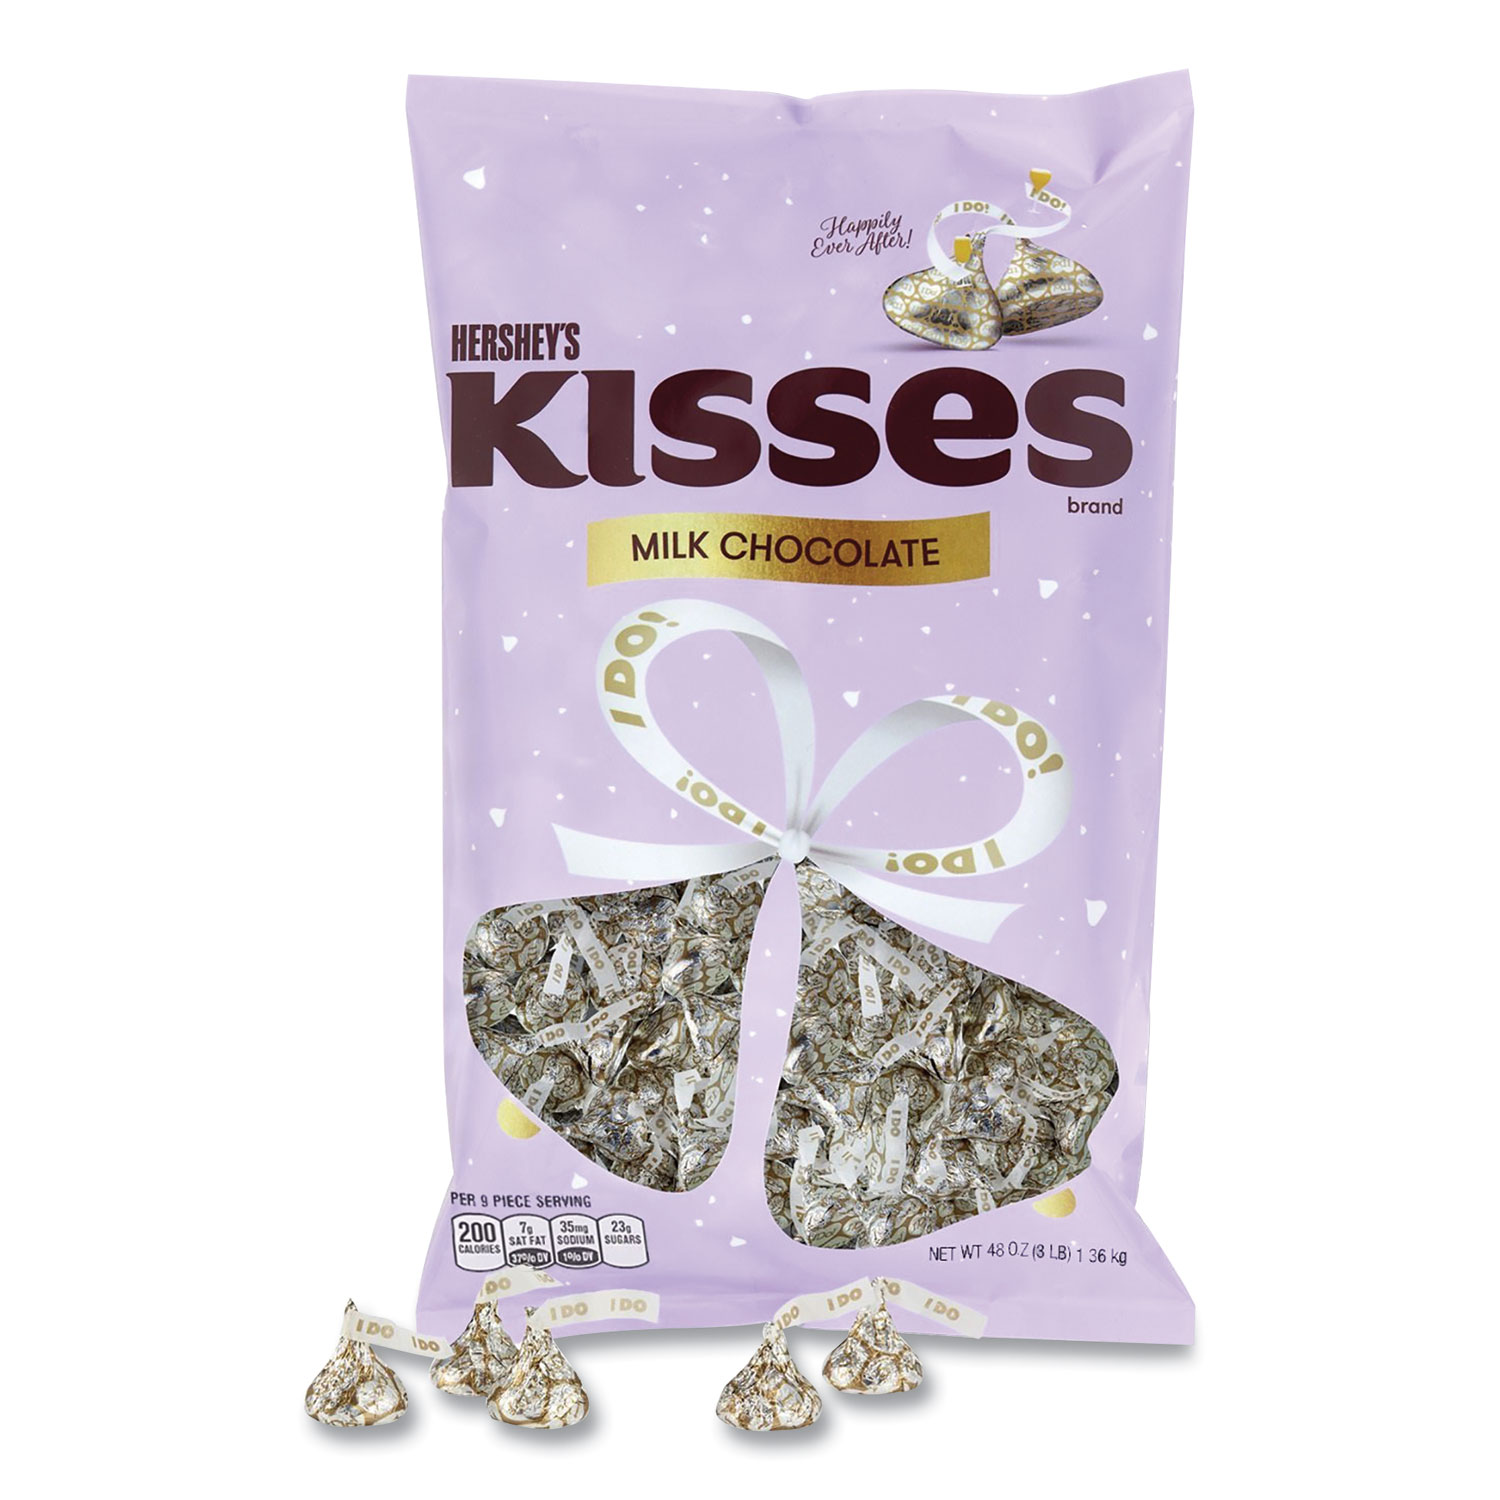  Hershey's 13335 KISSES Wedding I Do Milk Chocolates, Gold Wrappers/Silver Hearts, 48 oz Bag, Free Delivery in 1-4 Business Days (GRR24600222) 